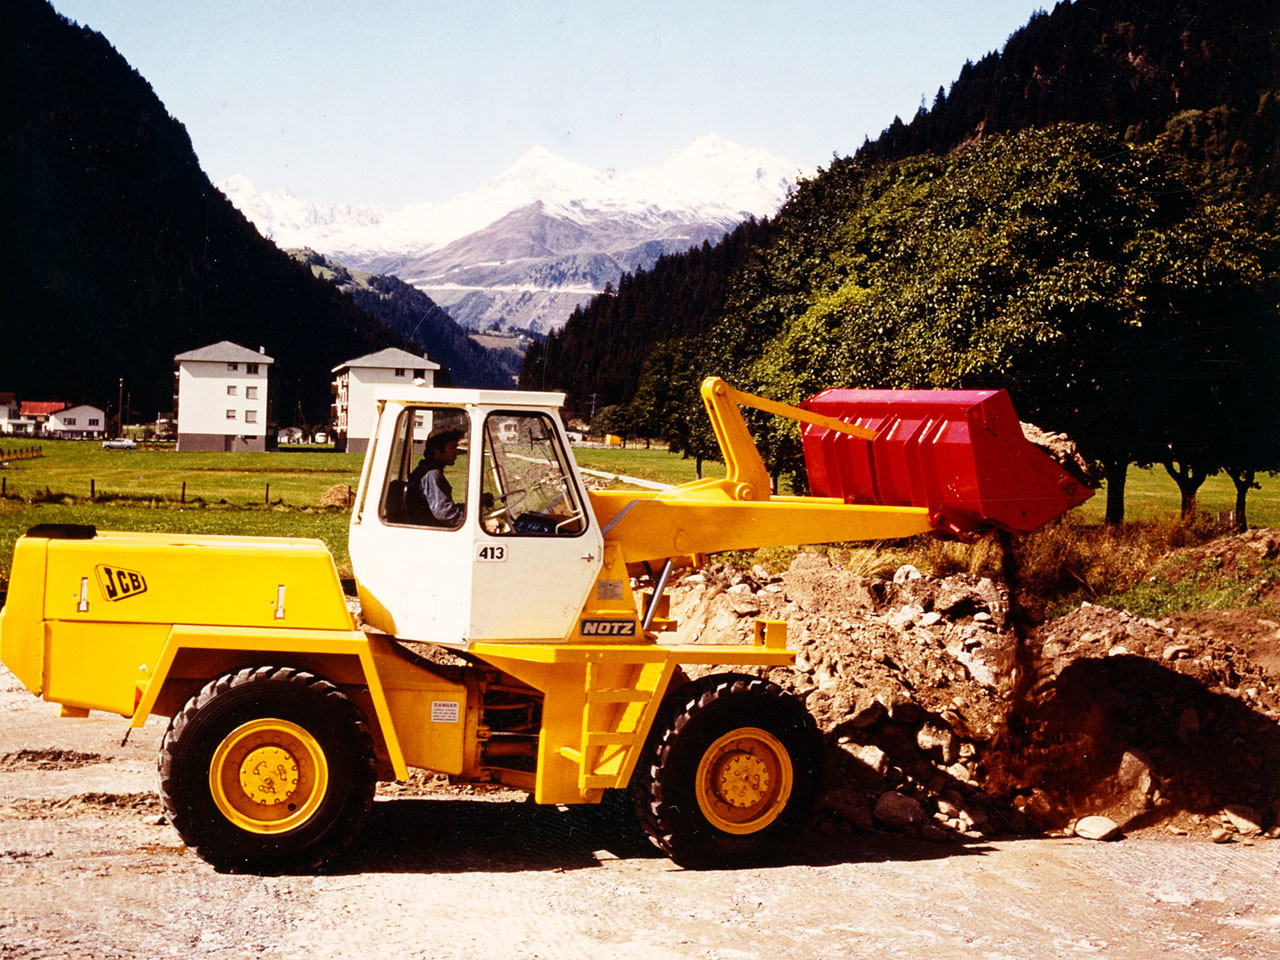 JCB nelle pagine della storia 1680x1050_1558611112_1971---along-with-the-418-the-413-was-the-first-jcb-designed-machine-and-they-featured-cabs-mounted-on-the-front-section-of-the-machines